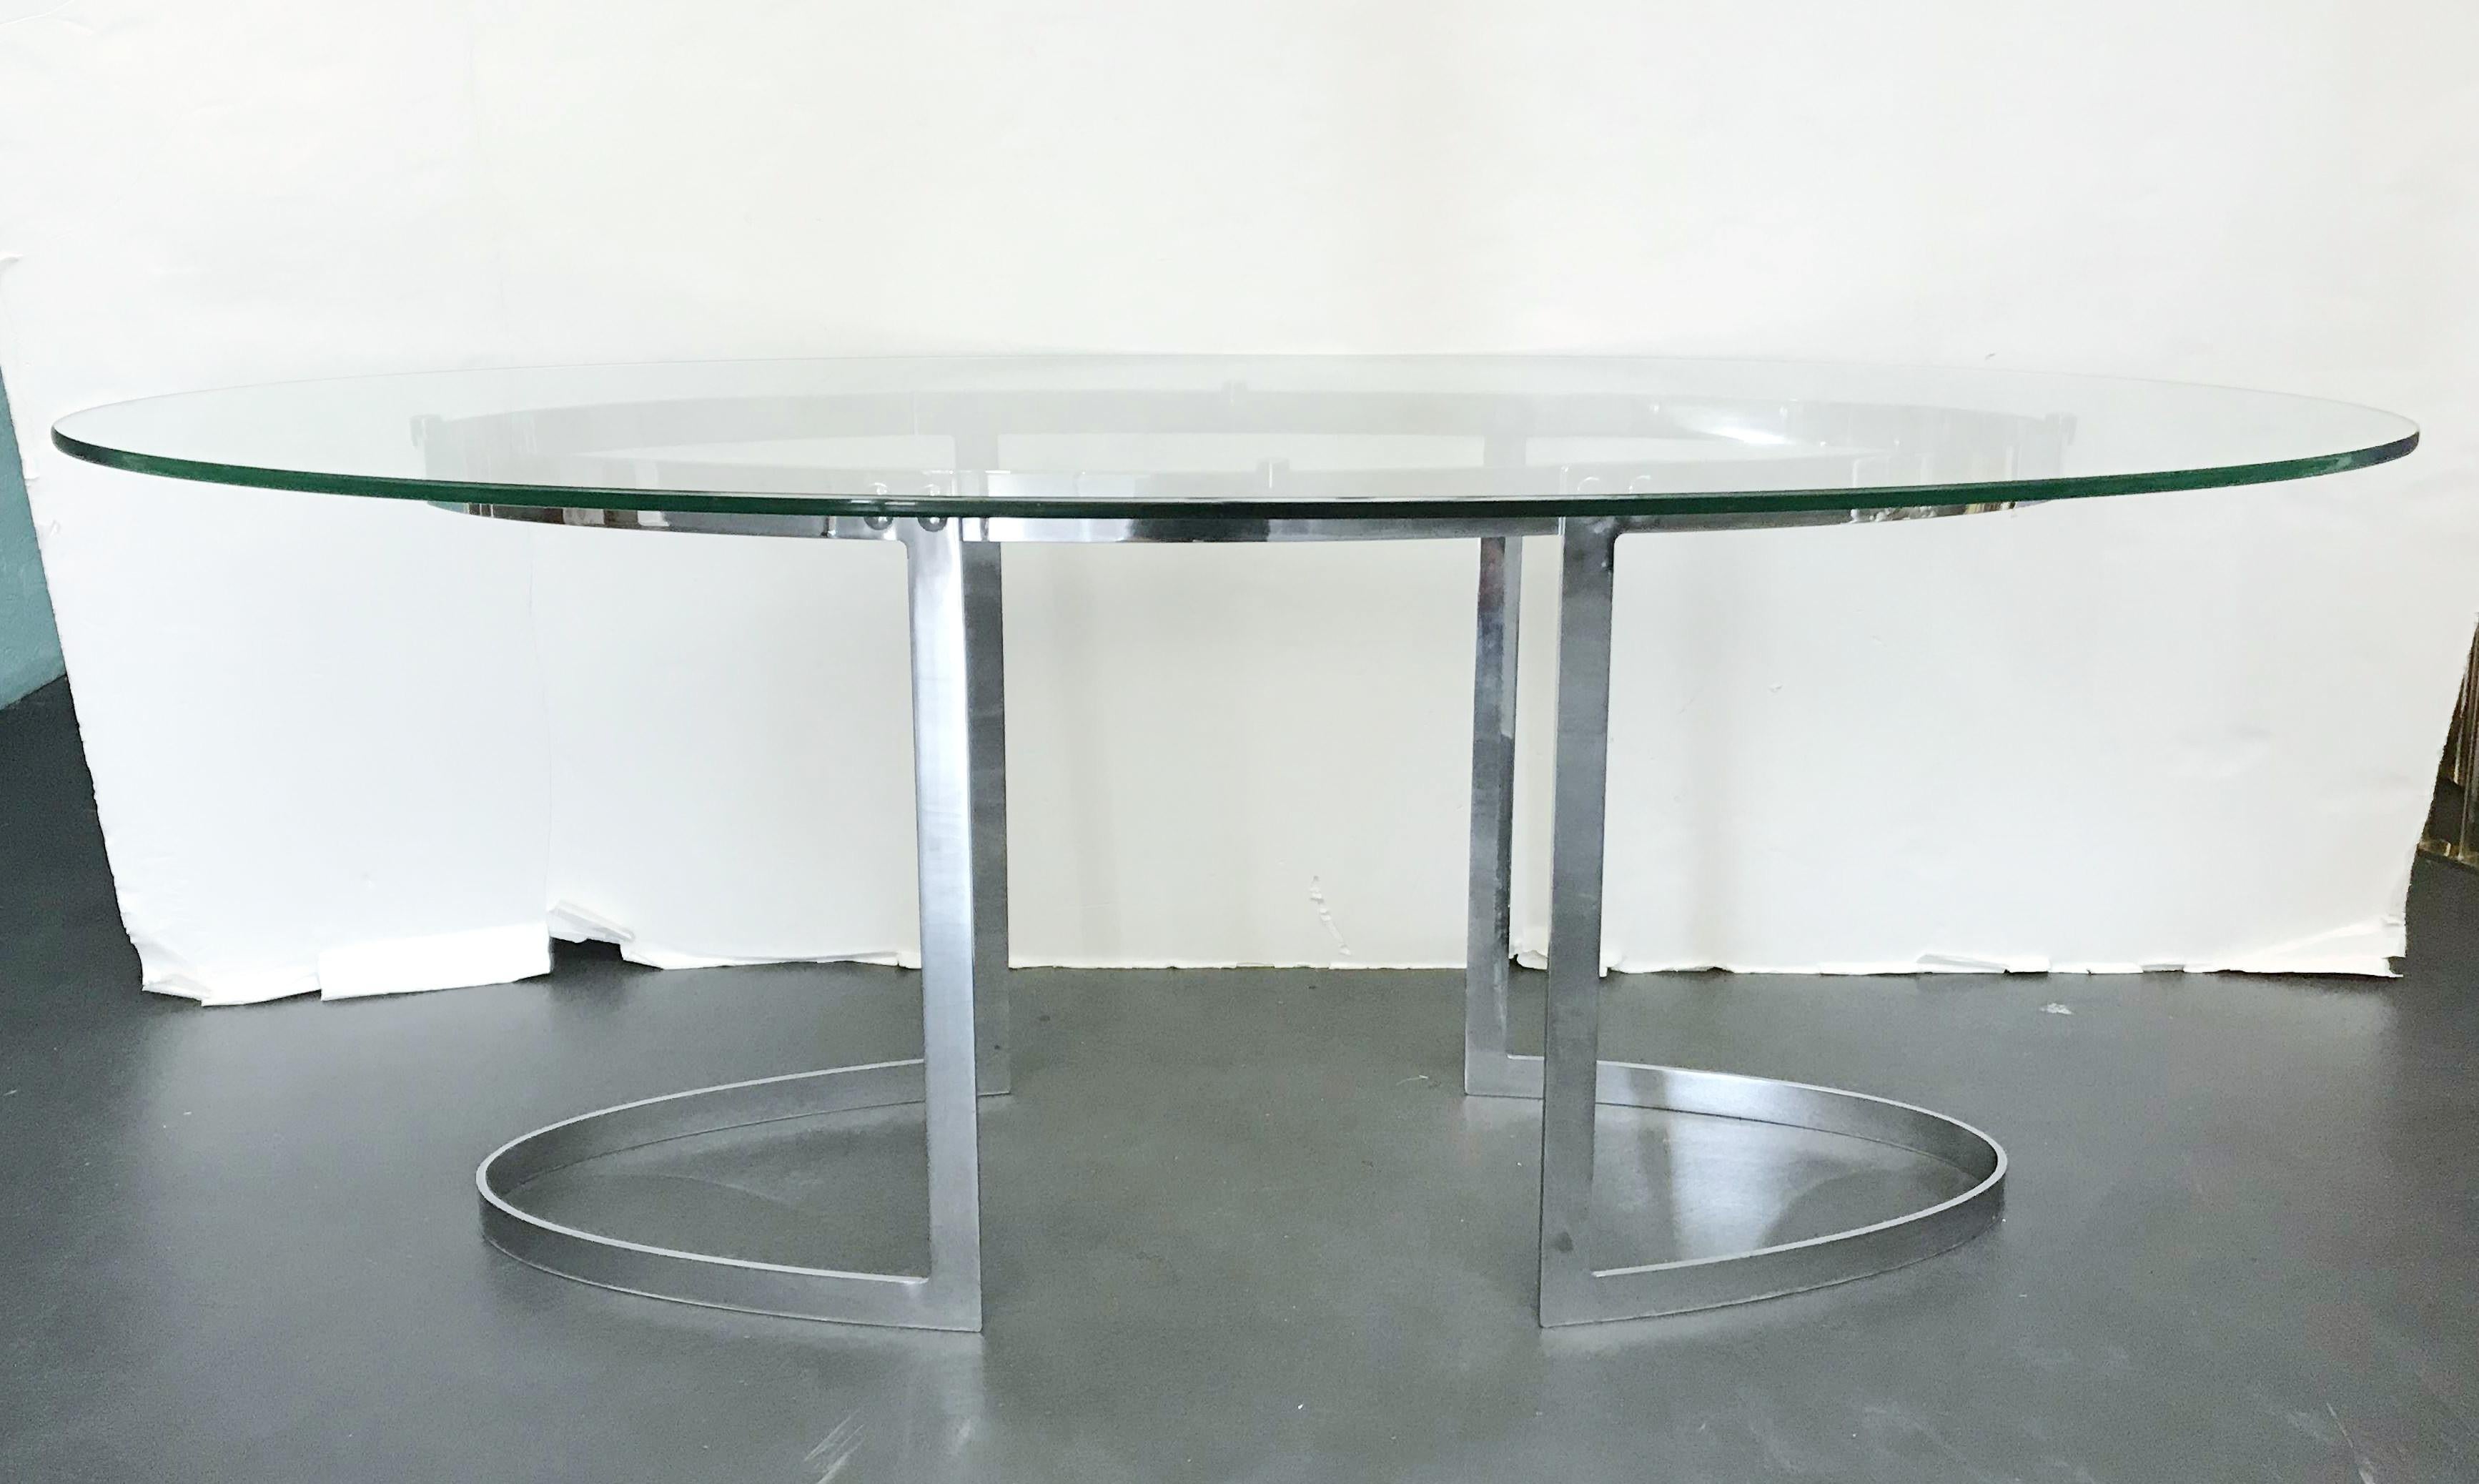 Vintage center or sofa table with thick oval beveled glass top and stainless steel base / Made in the USA, circa 1970s
Measures: Width 74 inches, depth 31.5 inches, height 27.5 inches
1 available in stock in Palm Springs on FINAL CLEARANCE SALE for